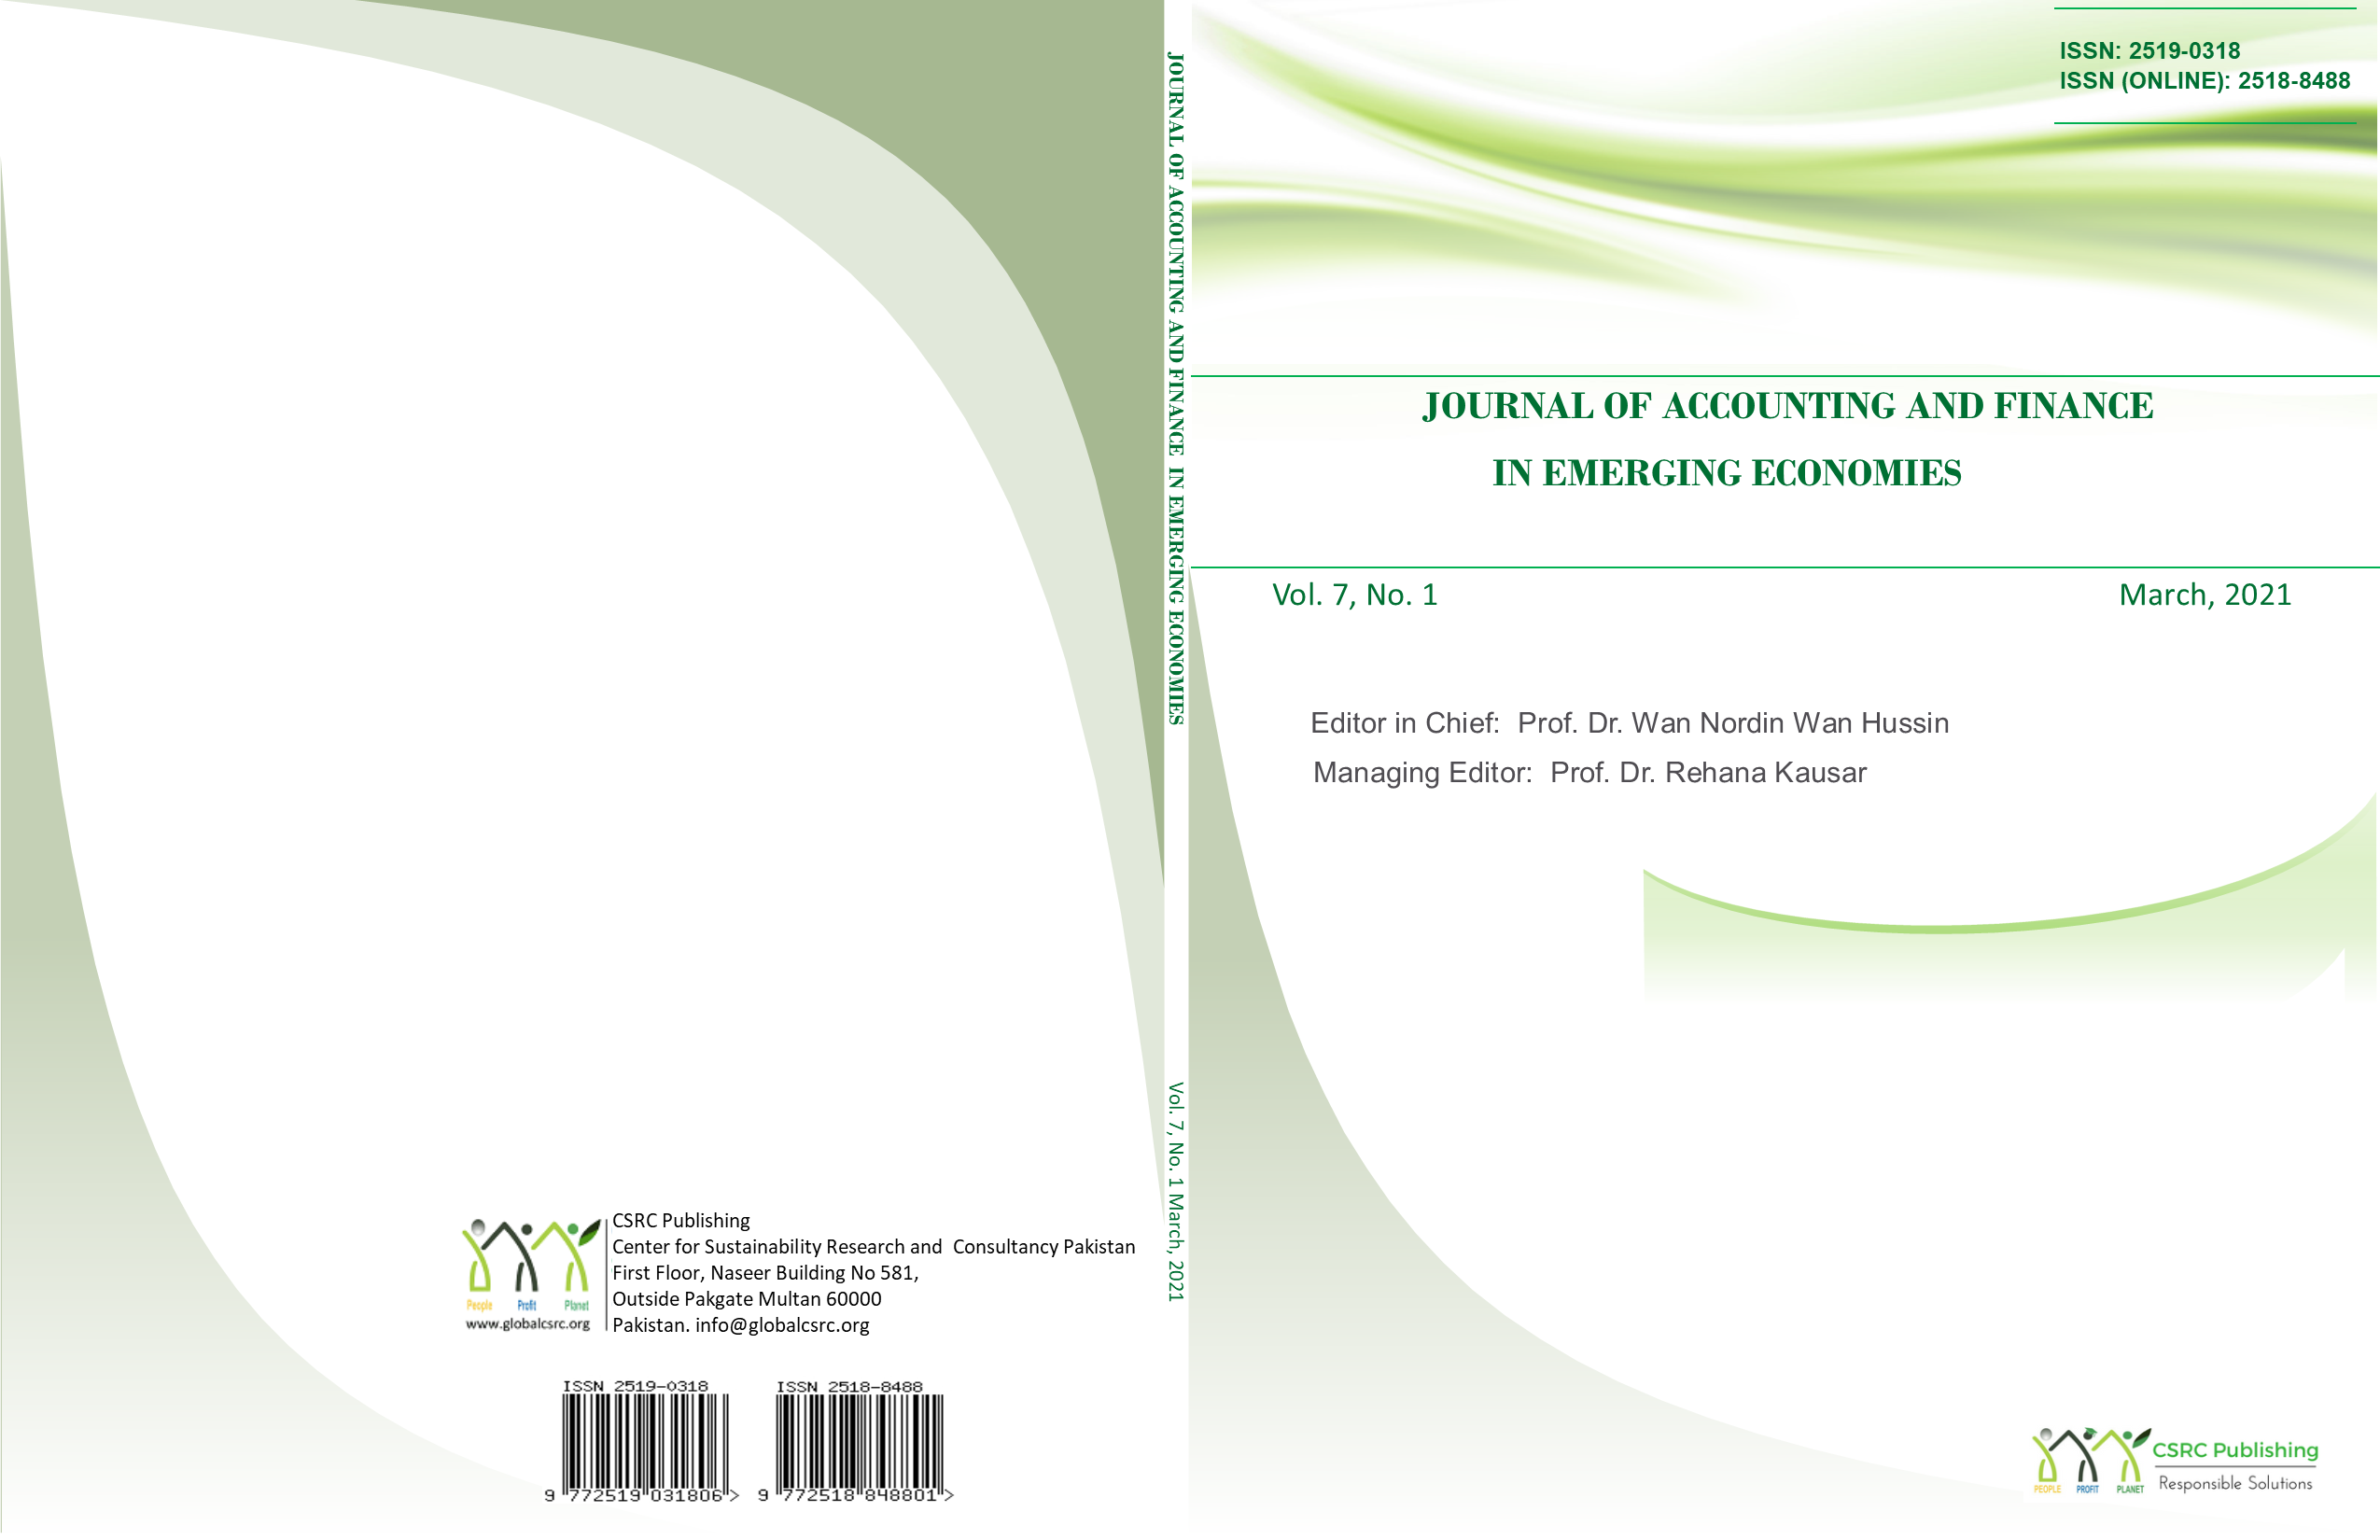 Journal of Accounting and Finance in Emerging Economies